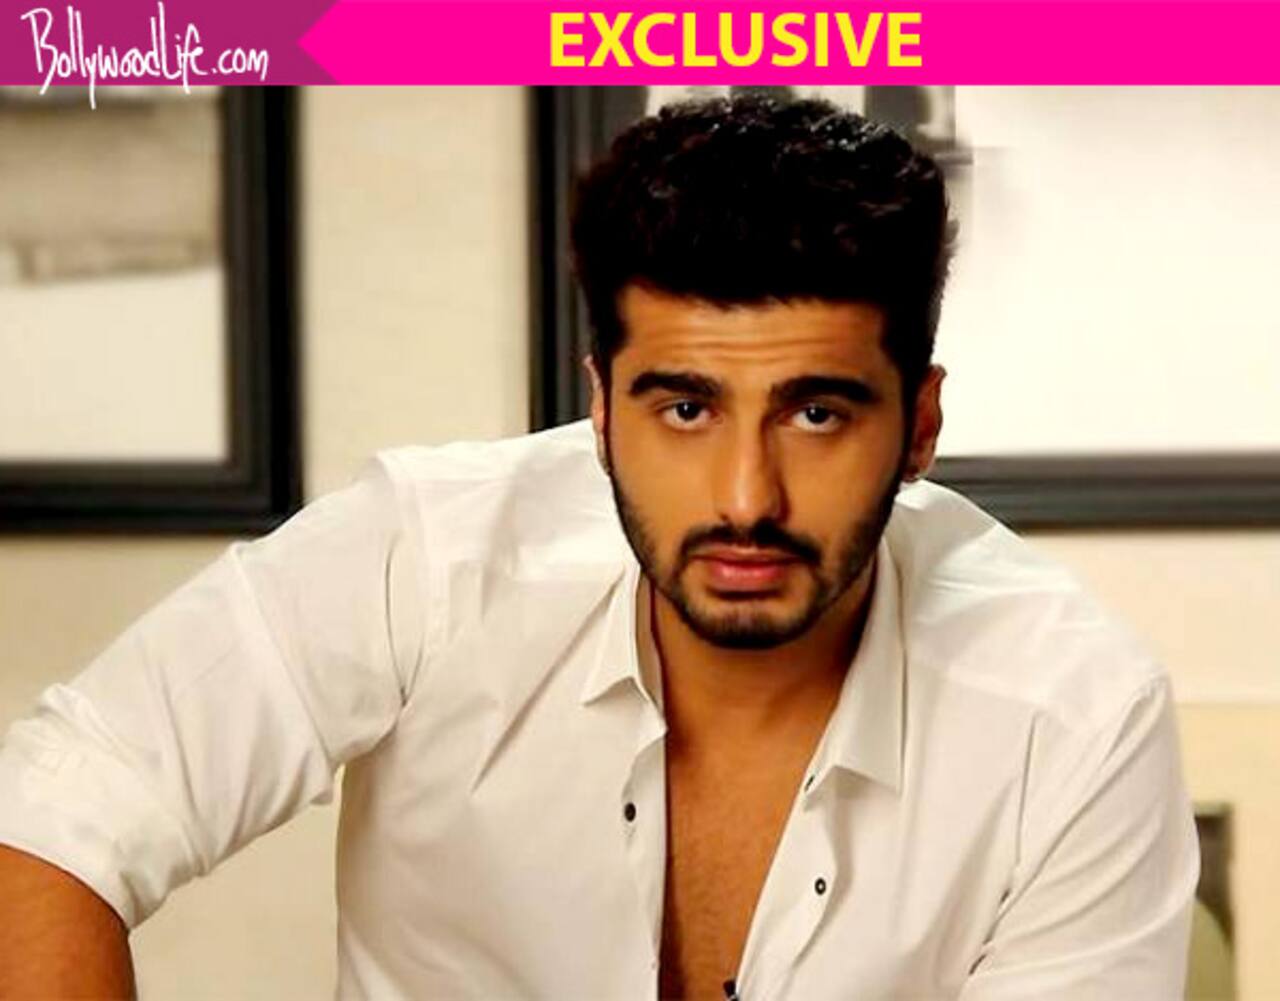 Arjun Kapoor working 18 hours a day to ensure Namaste England schedule is  on track - Bollywood News & Gossip, Movie Reviews, Trailers & Videos at  